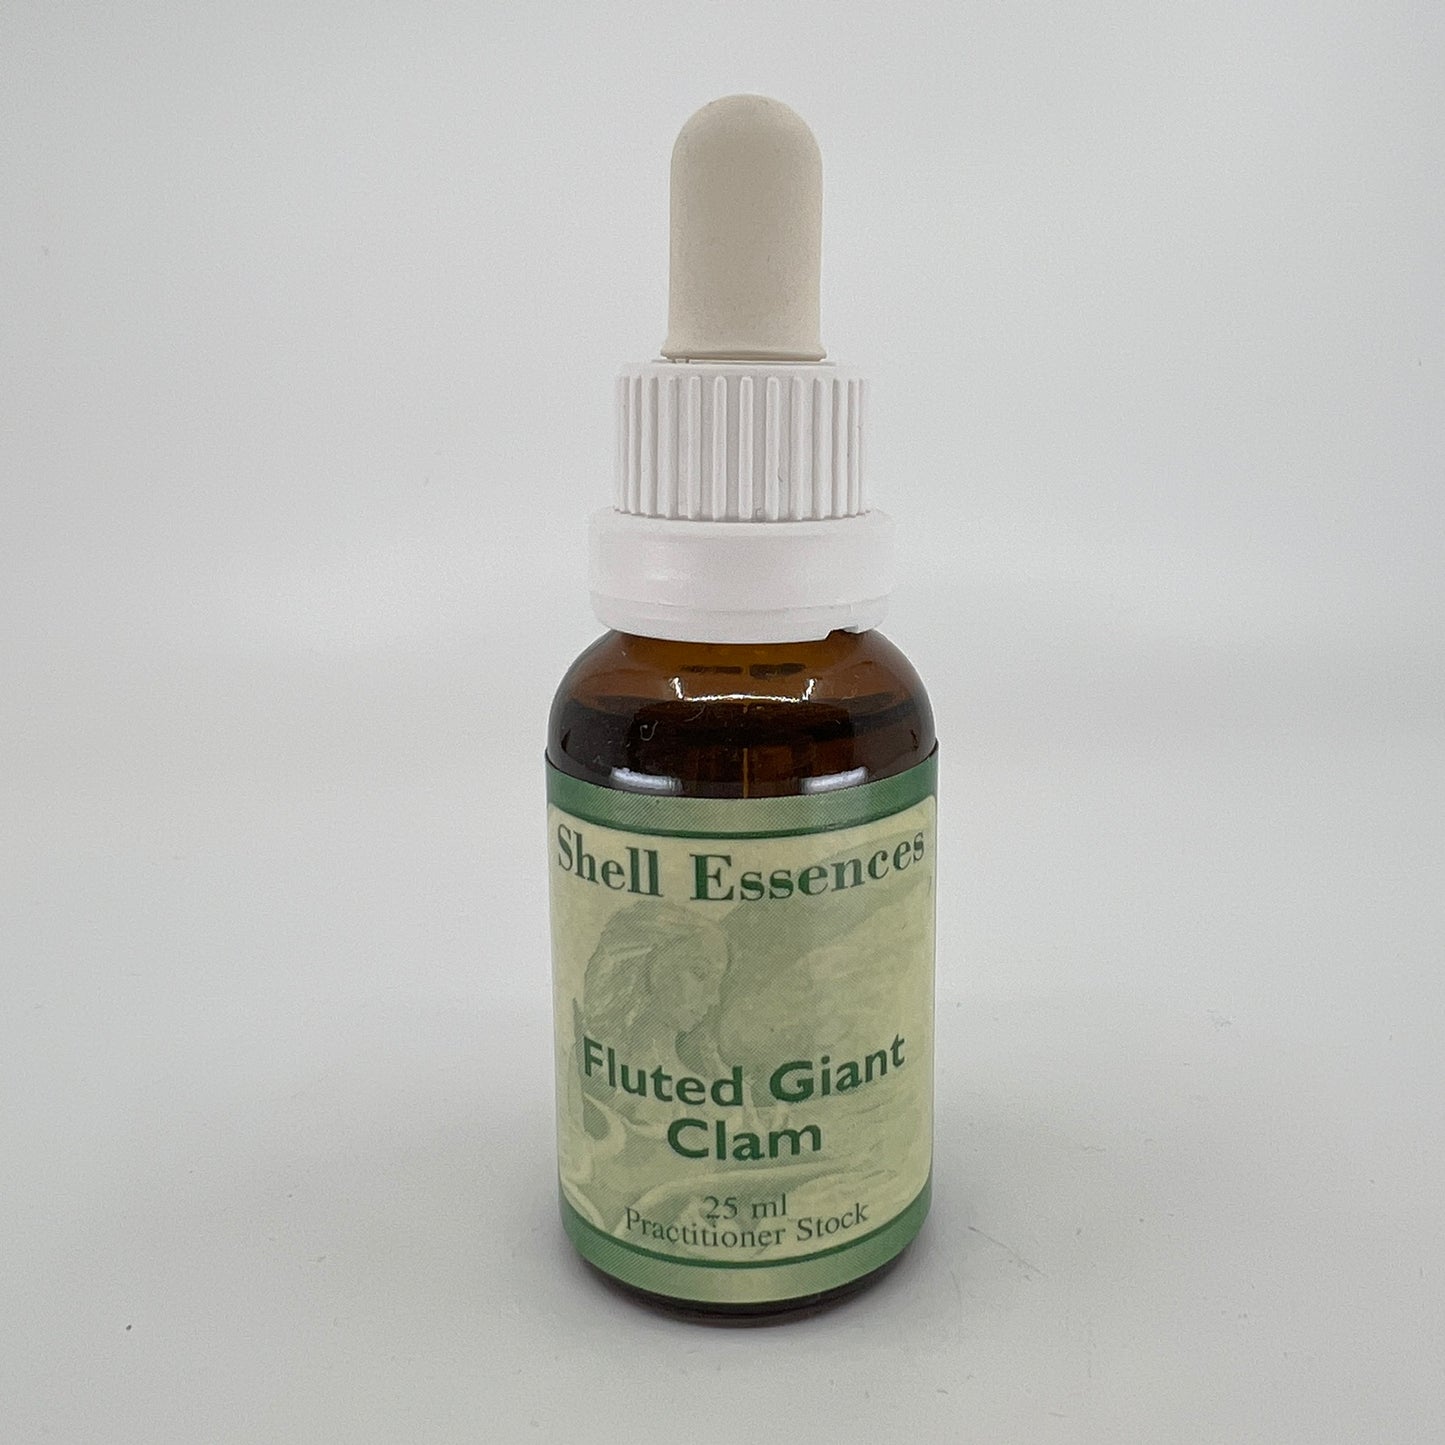 Fluted giant clam animal essence 25ml